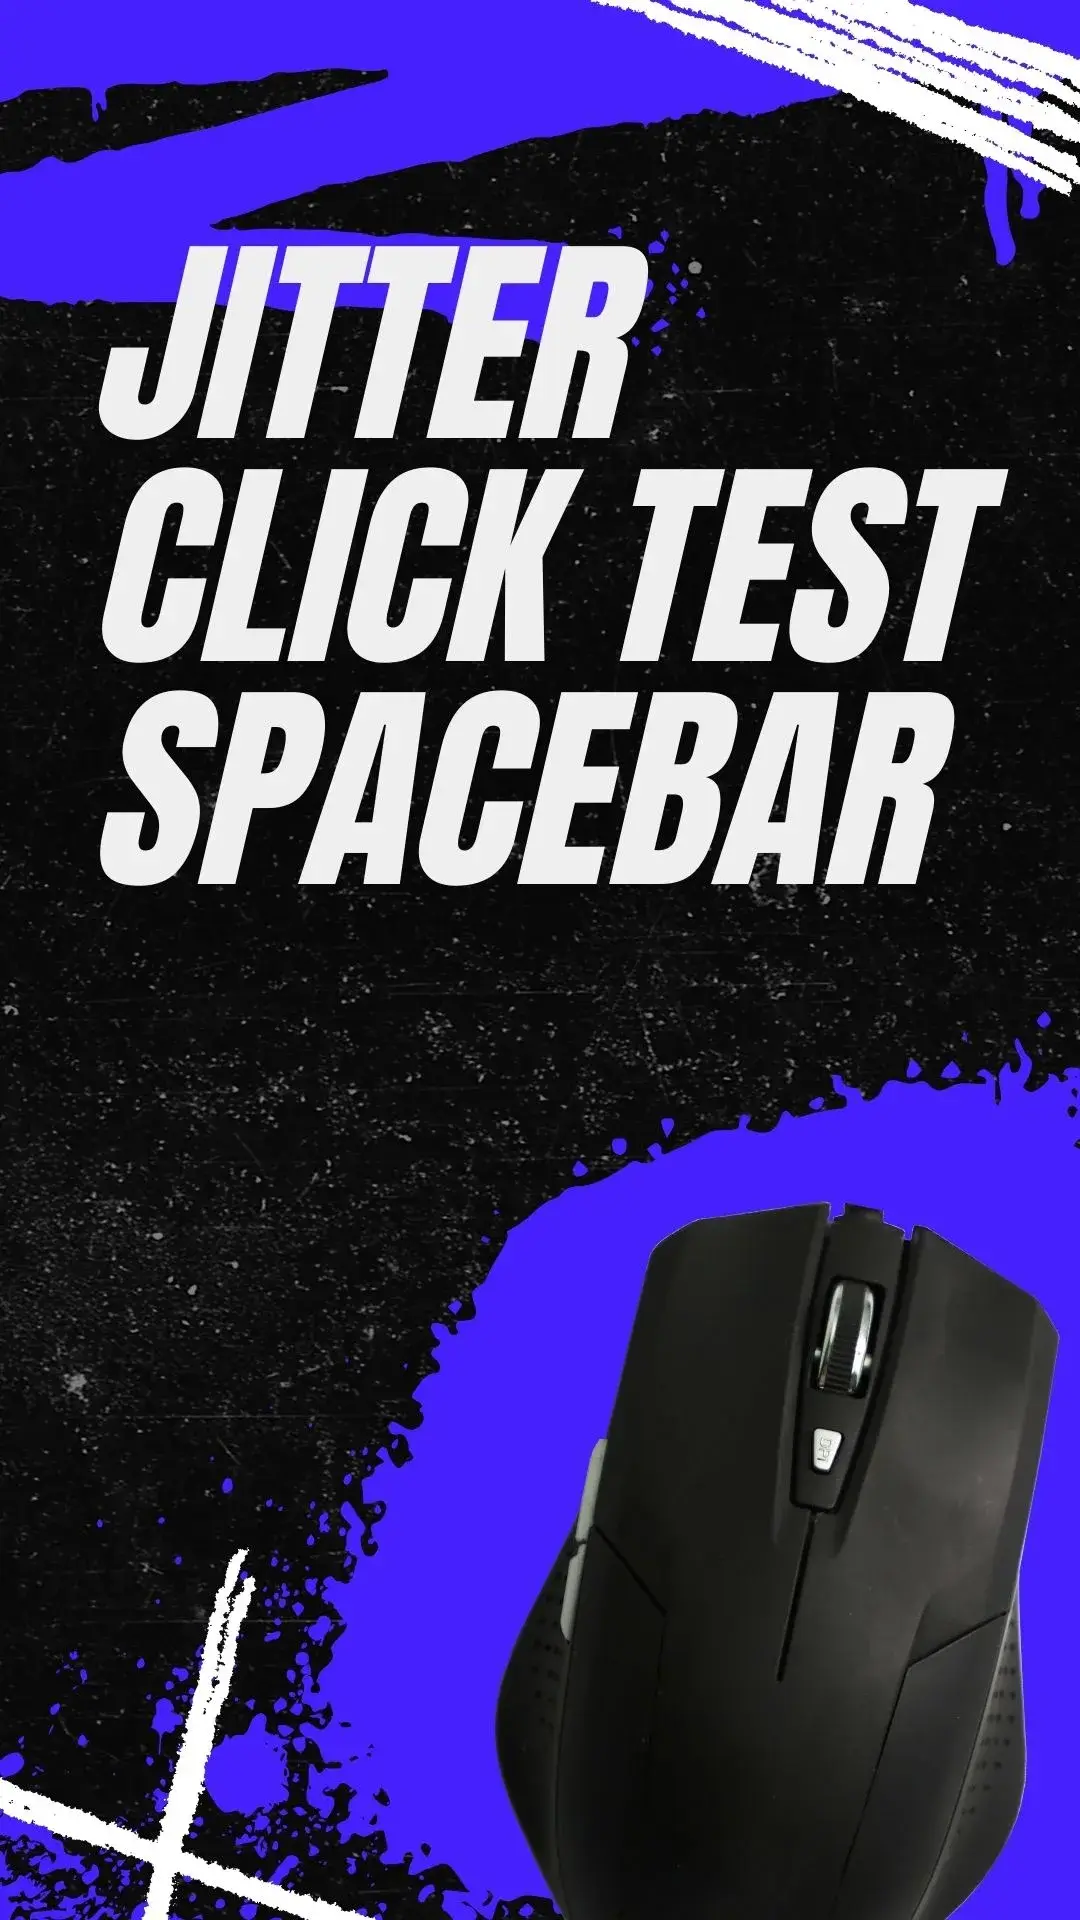 Jitter Click Test  Boost Your Click Speed & Gaming Prowess!